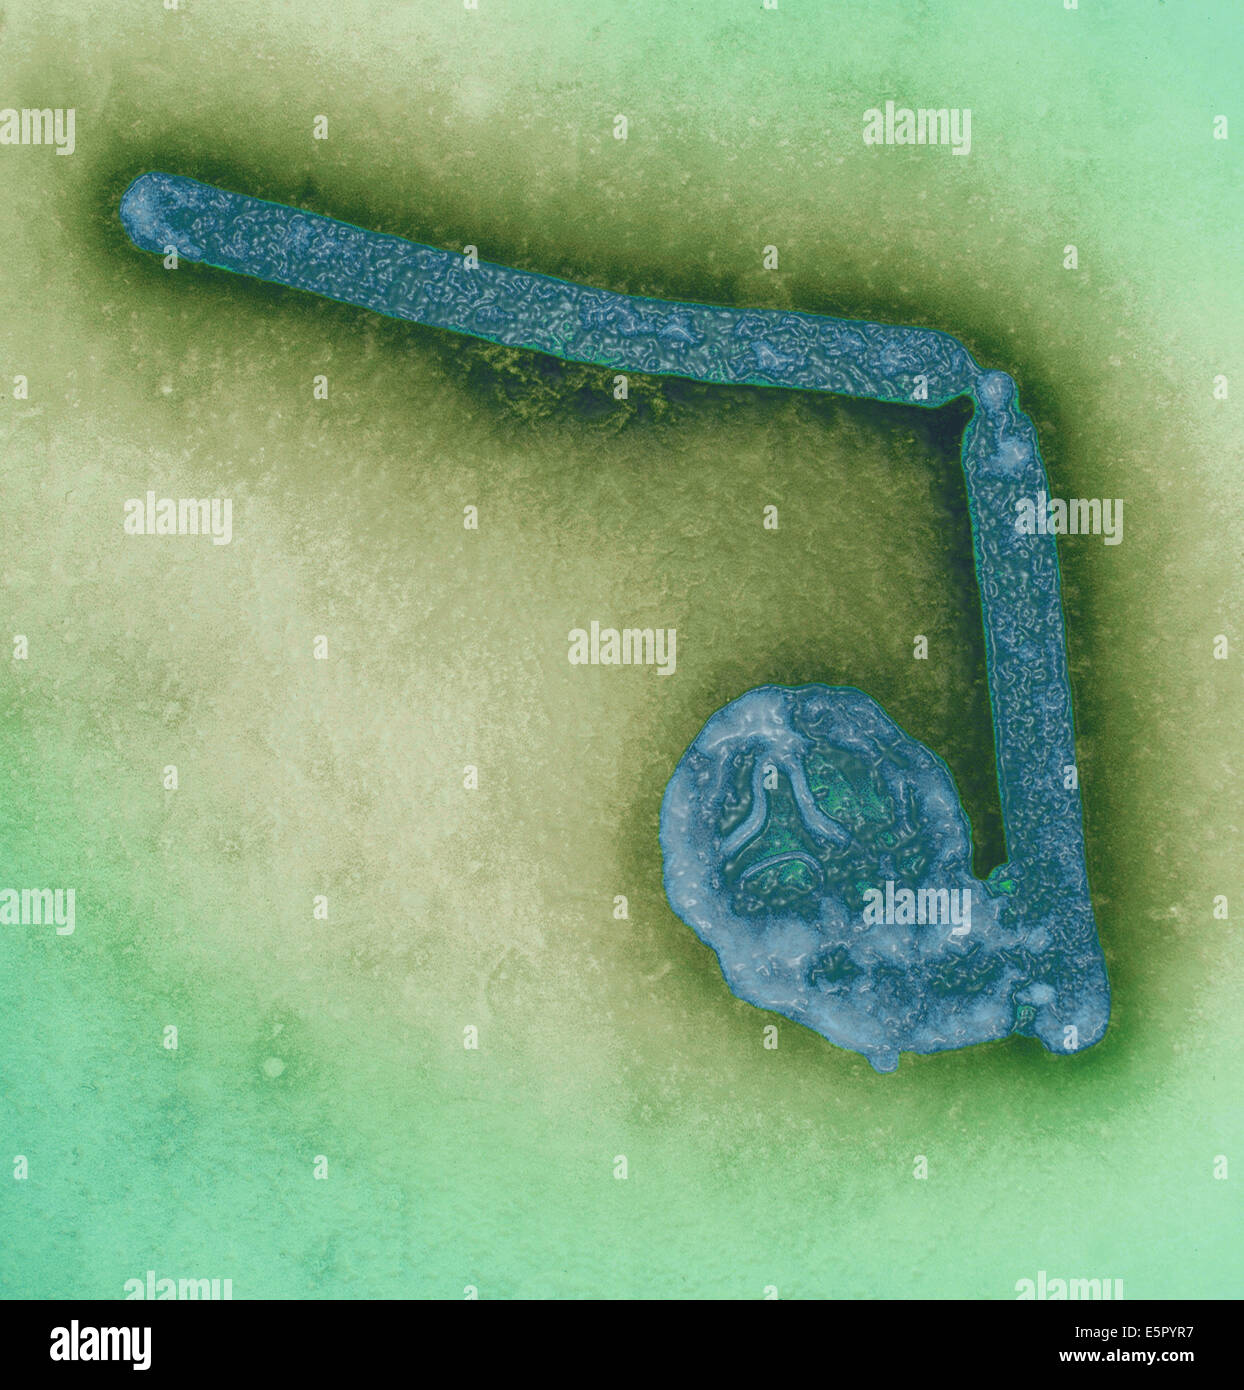 Transmission electron micrograph (TEM) of two avian influenza A H5N1 viruses, Magnification x 108,000. Stock Photo